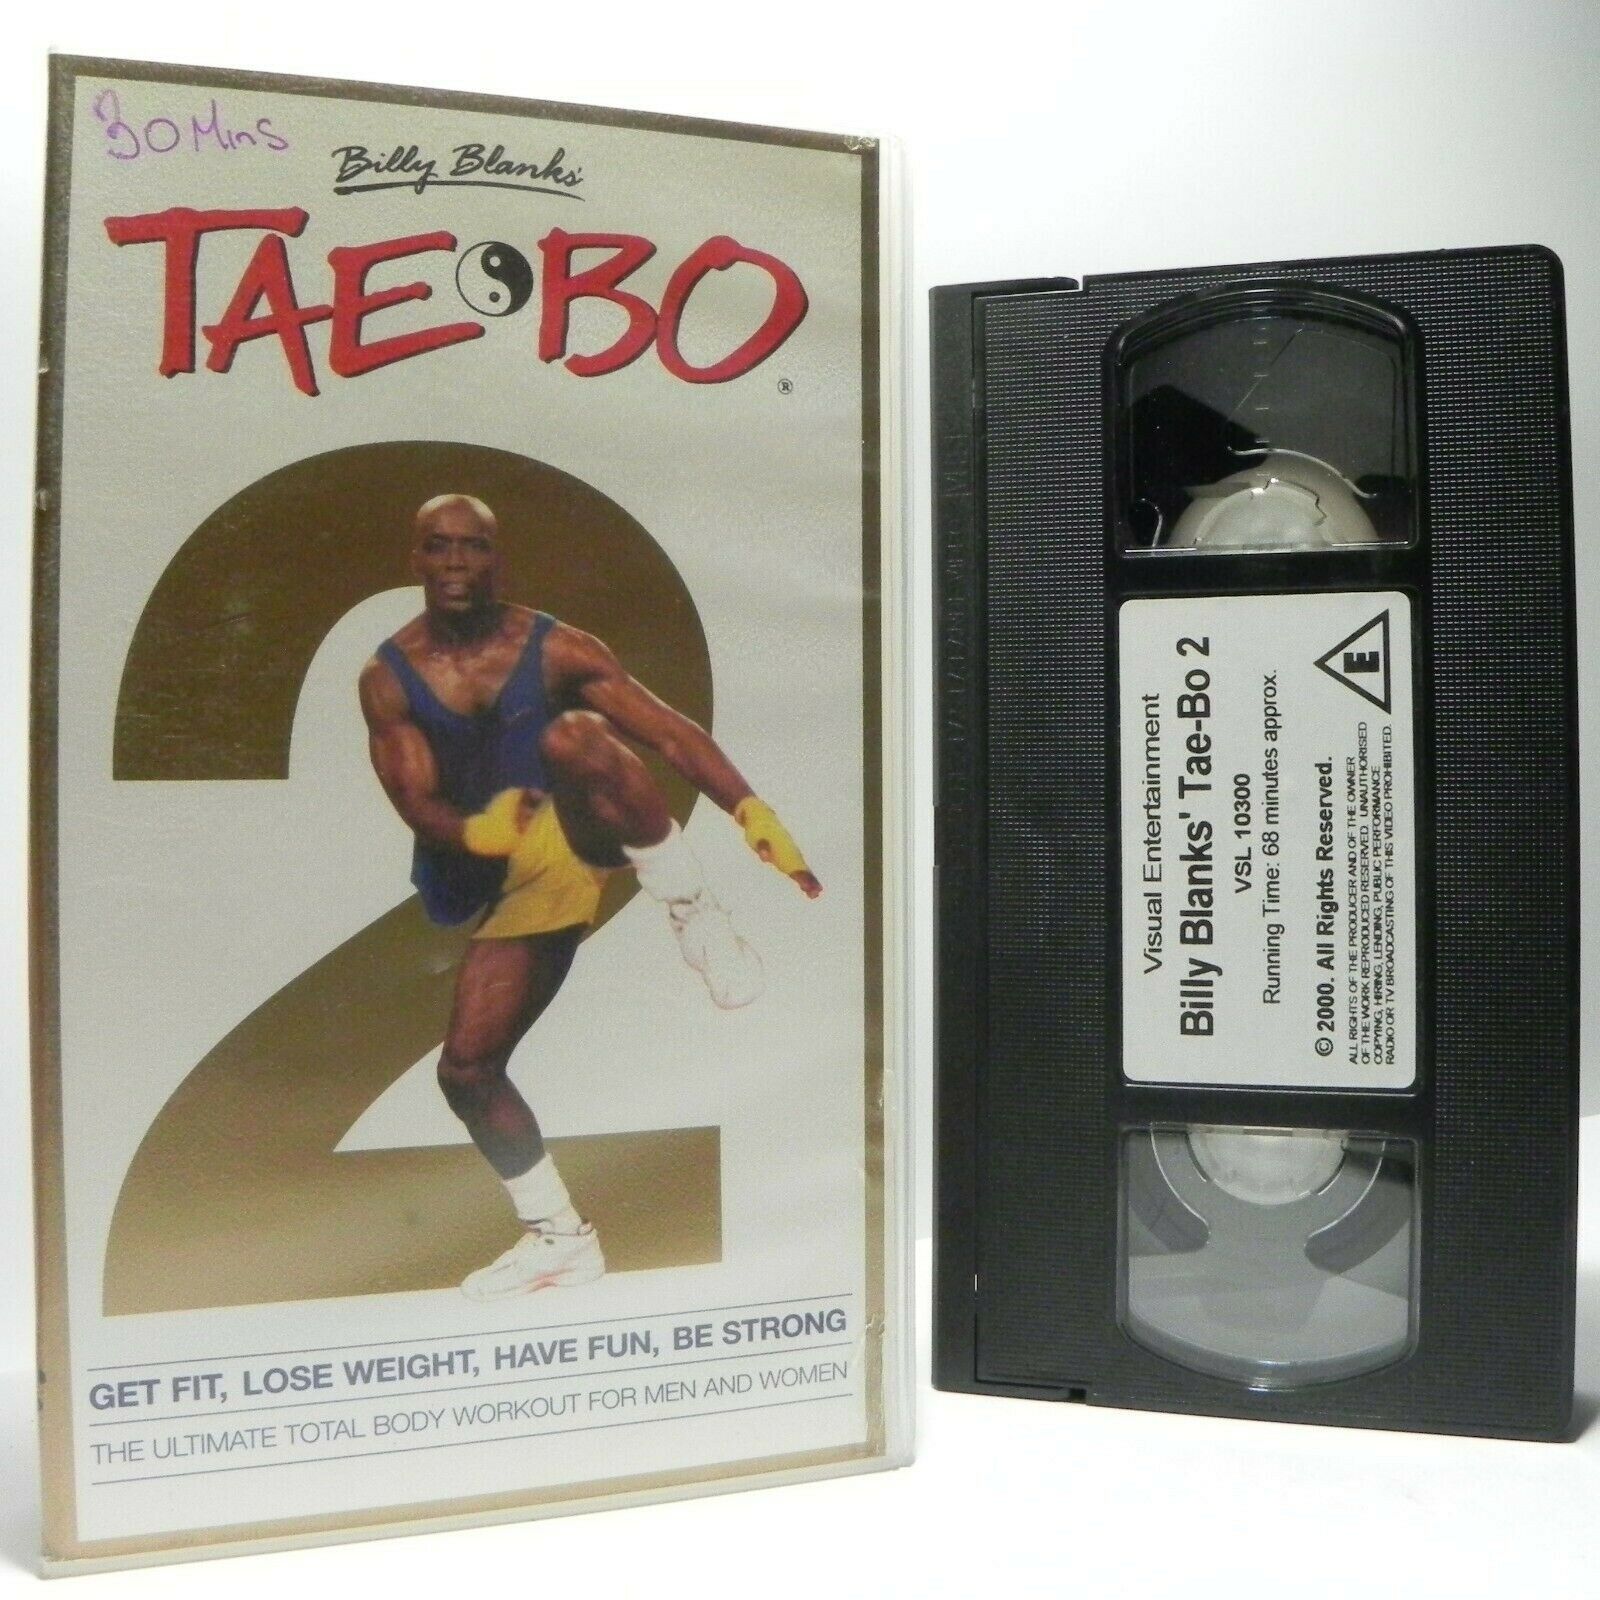 Tae Bo 2: By Billy Blank - Great Body Workout - Explosive Energy - Fitness - VHS-